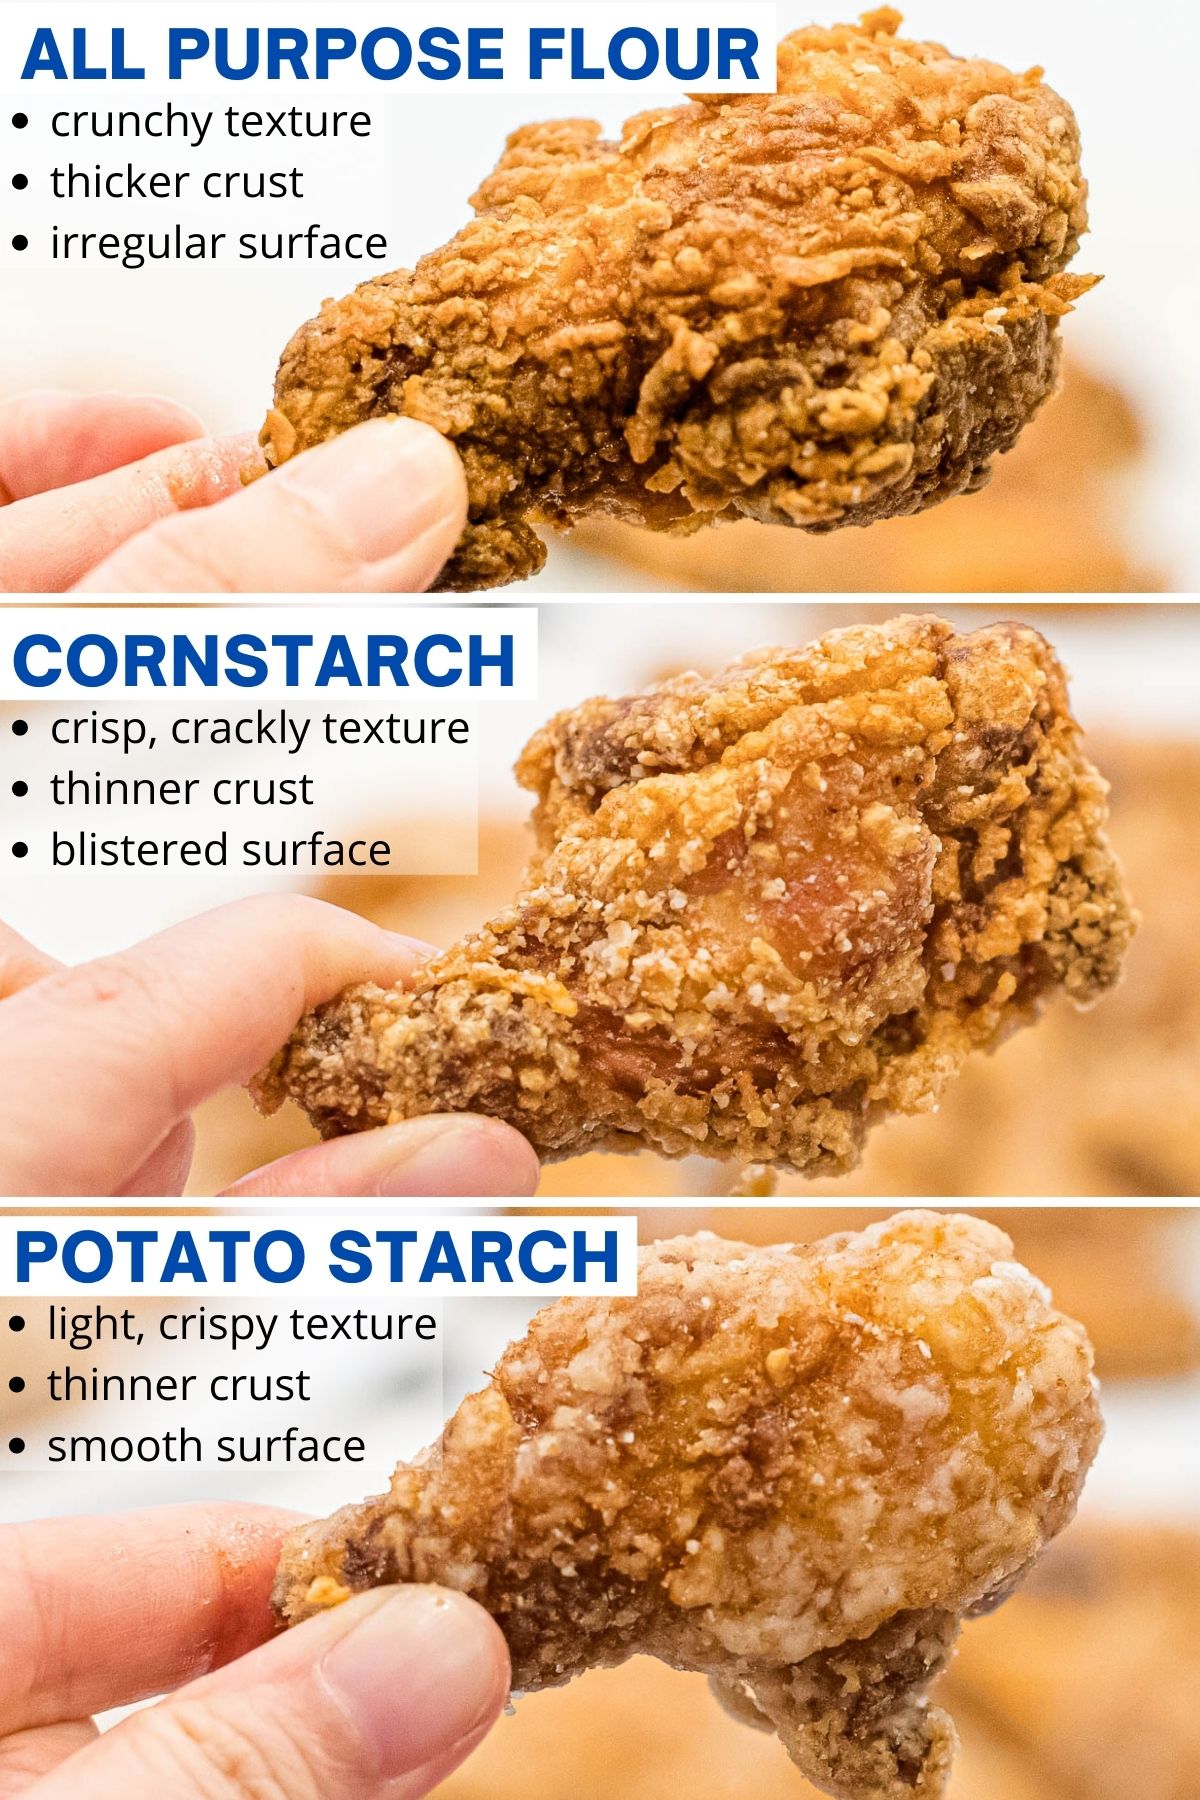 photos of fried chicken coated with all purpose flour, cornstarch, and potato starch